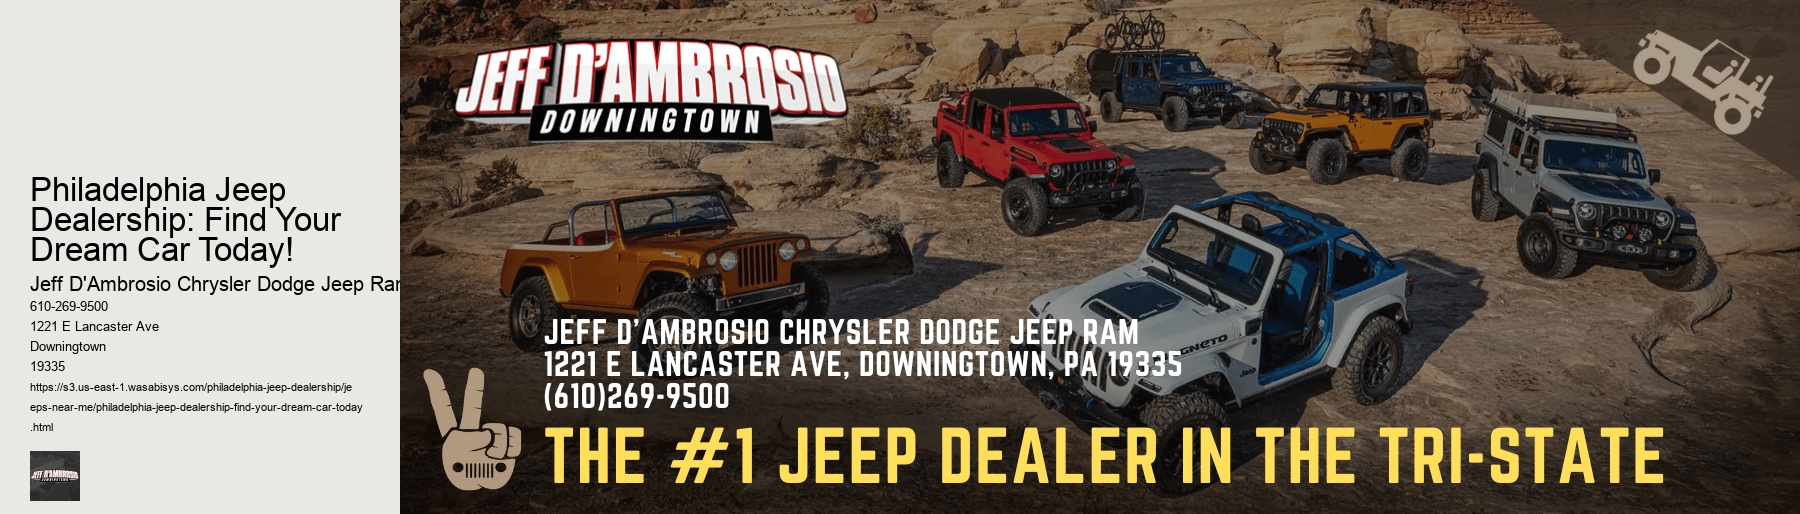 Philadelphia Jeep Dealership: Find Your Dream Car Today!